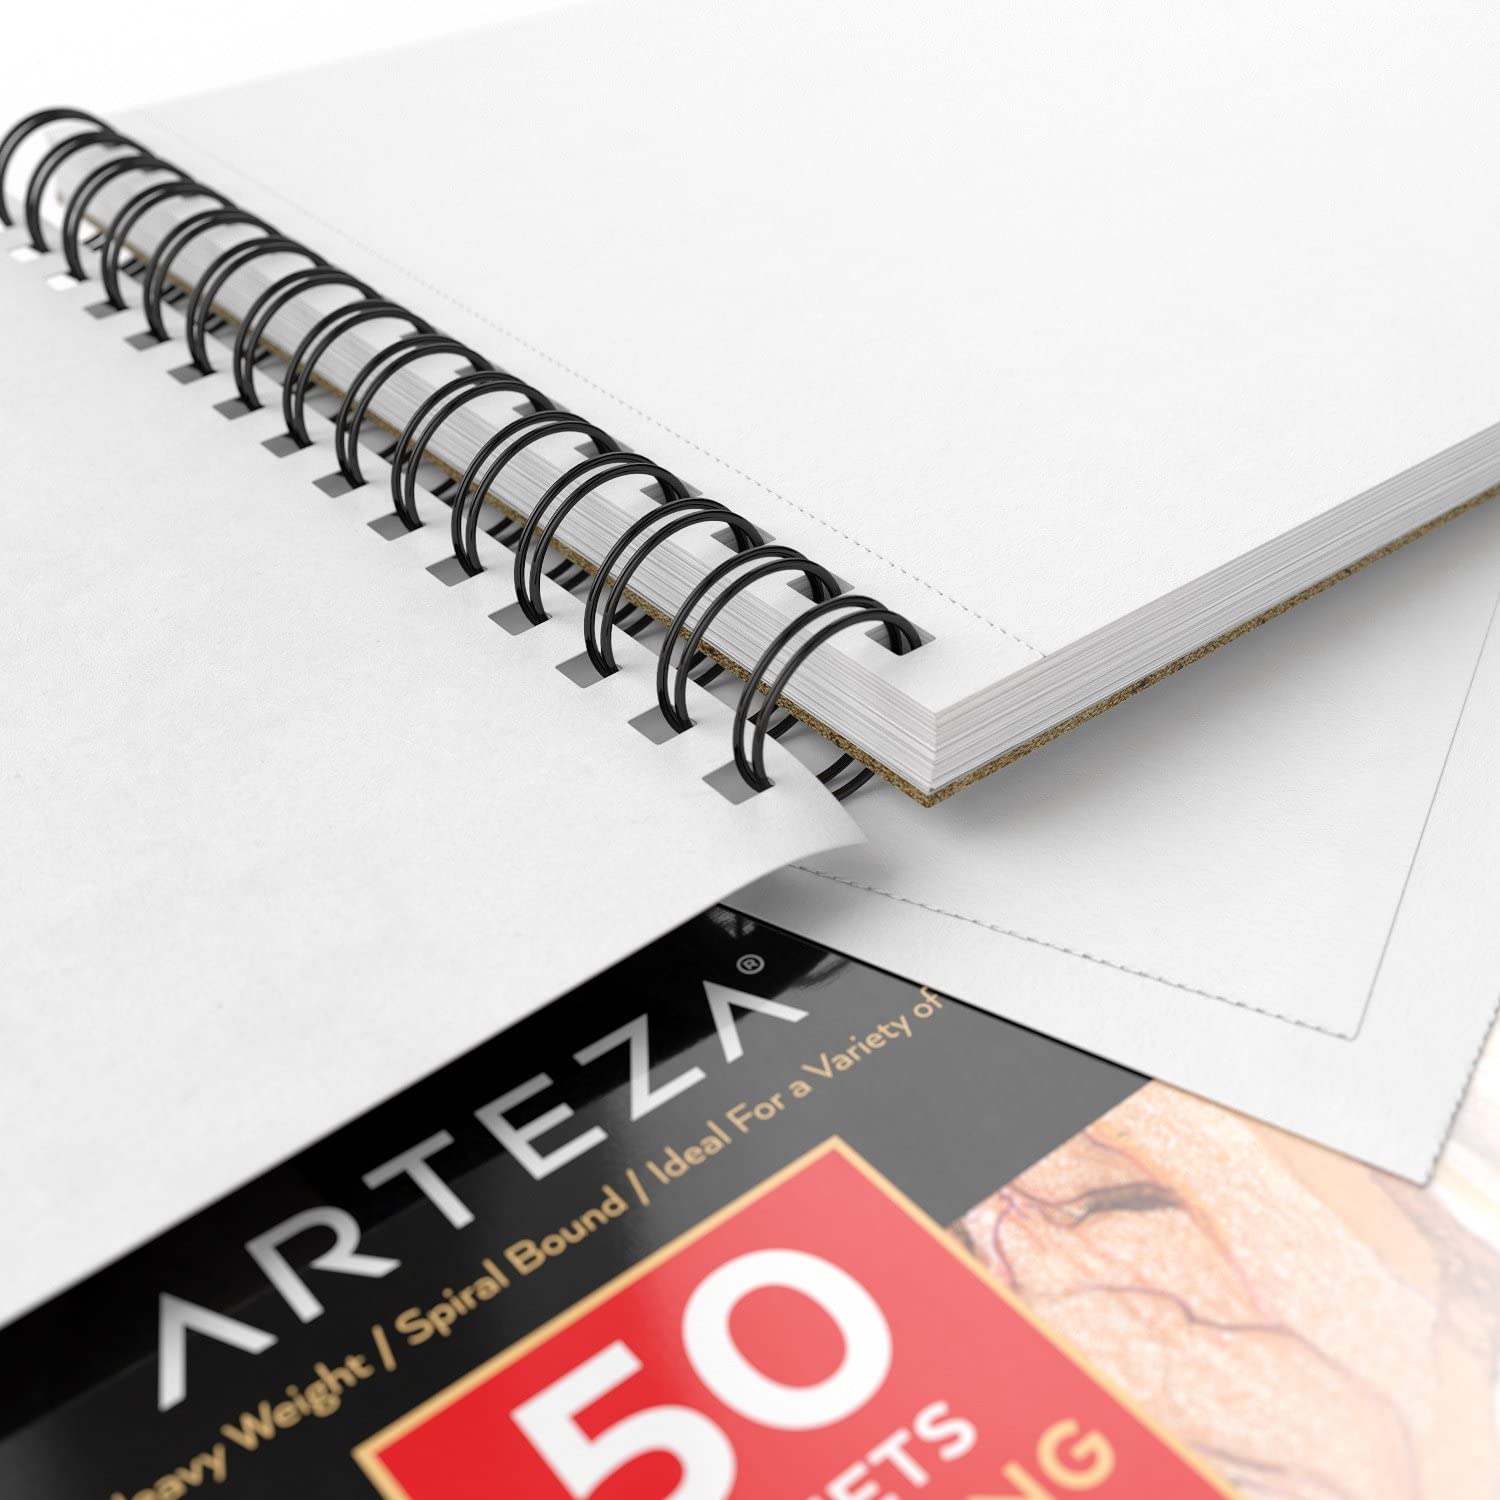  ARTEZA Drawing Pad 18 x 24 Inches, Pack of 2, Spiral Bound  Heavyweight Paper with Micro-Perforation, 75 lb/120gsm, 30 Sheets, Art  Supplies for a Variety of Dry Media : Arts, Crafts & Sewing